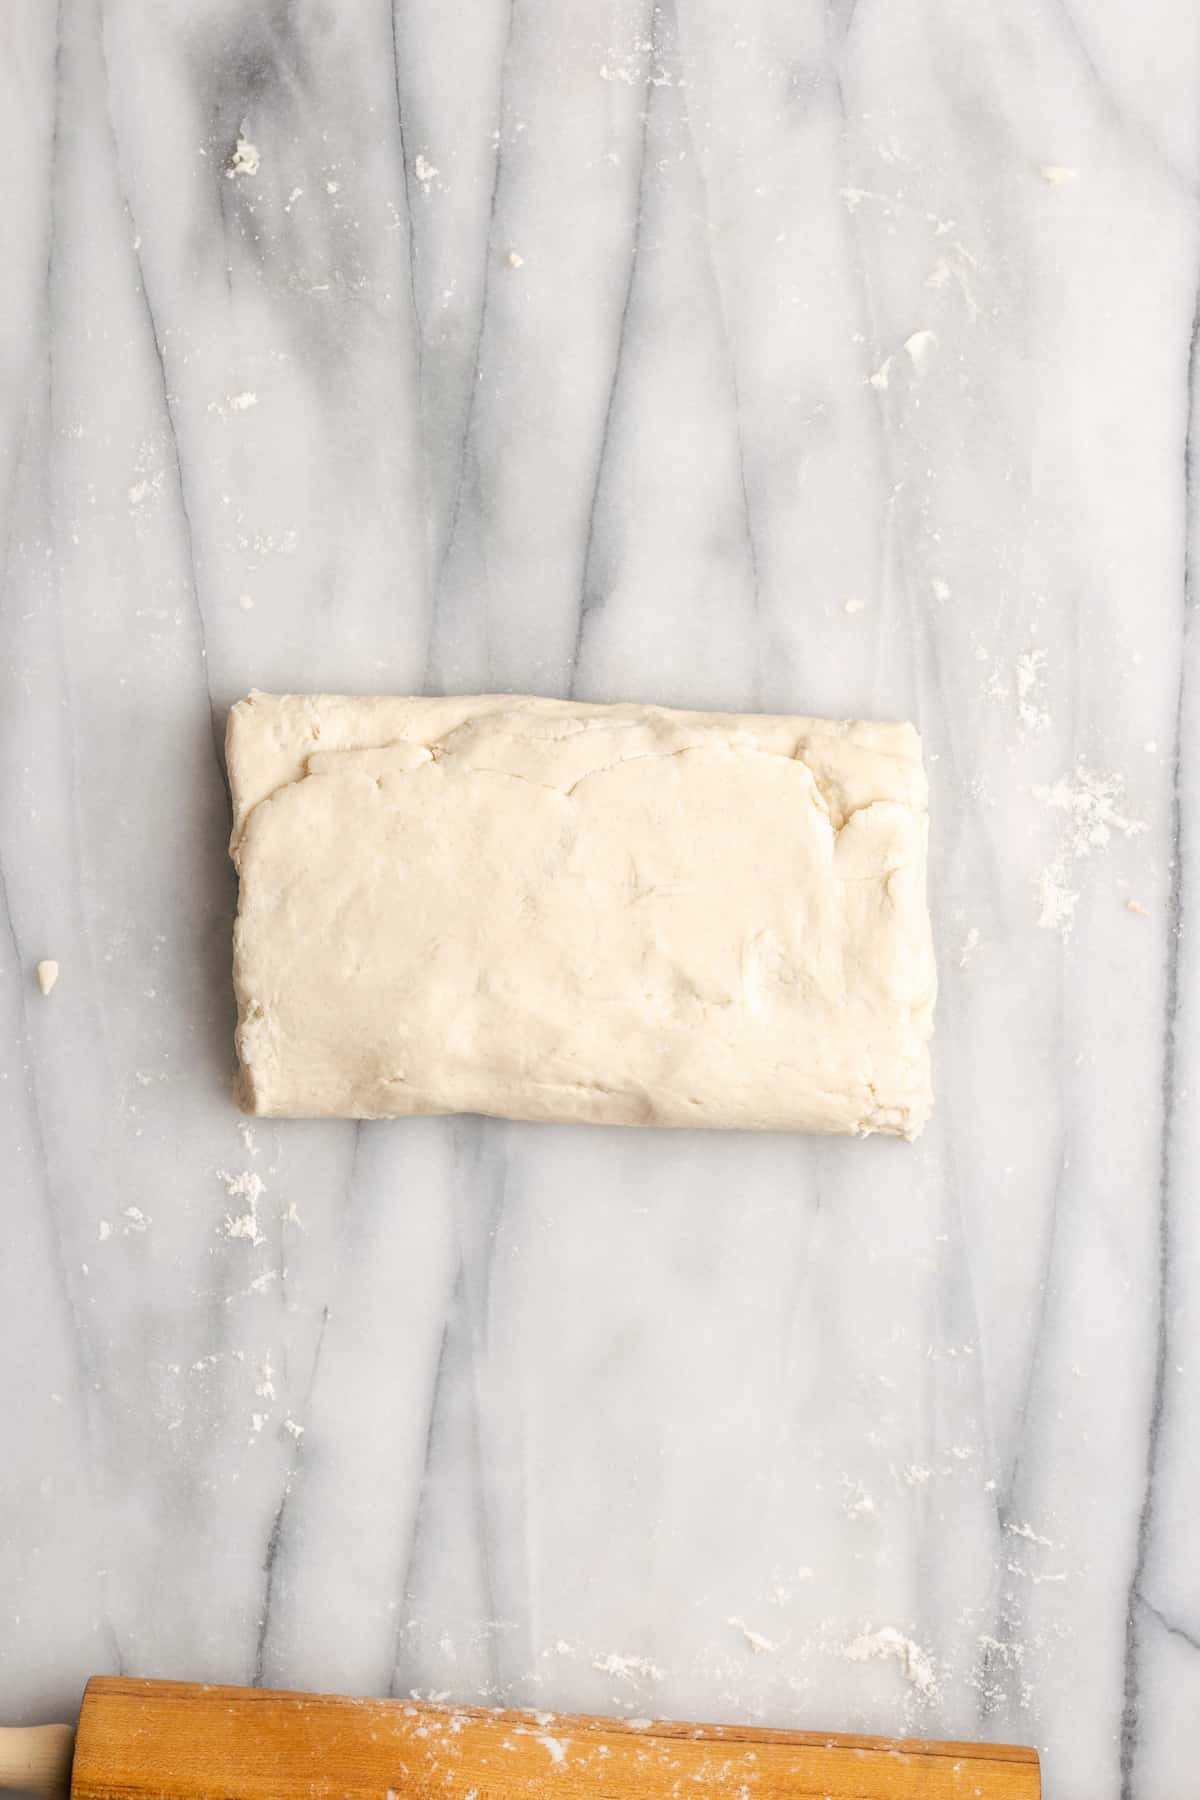 A thick envelope of puff pastry dough